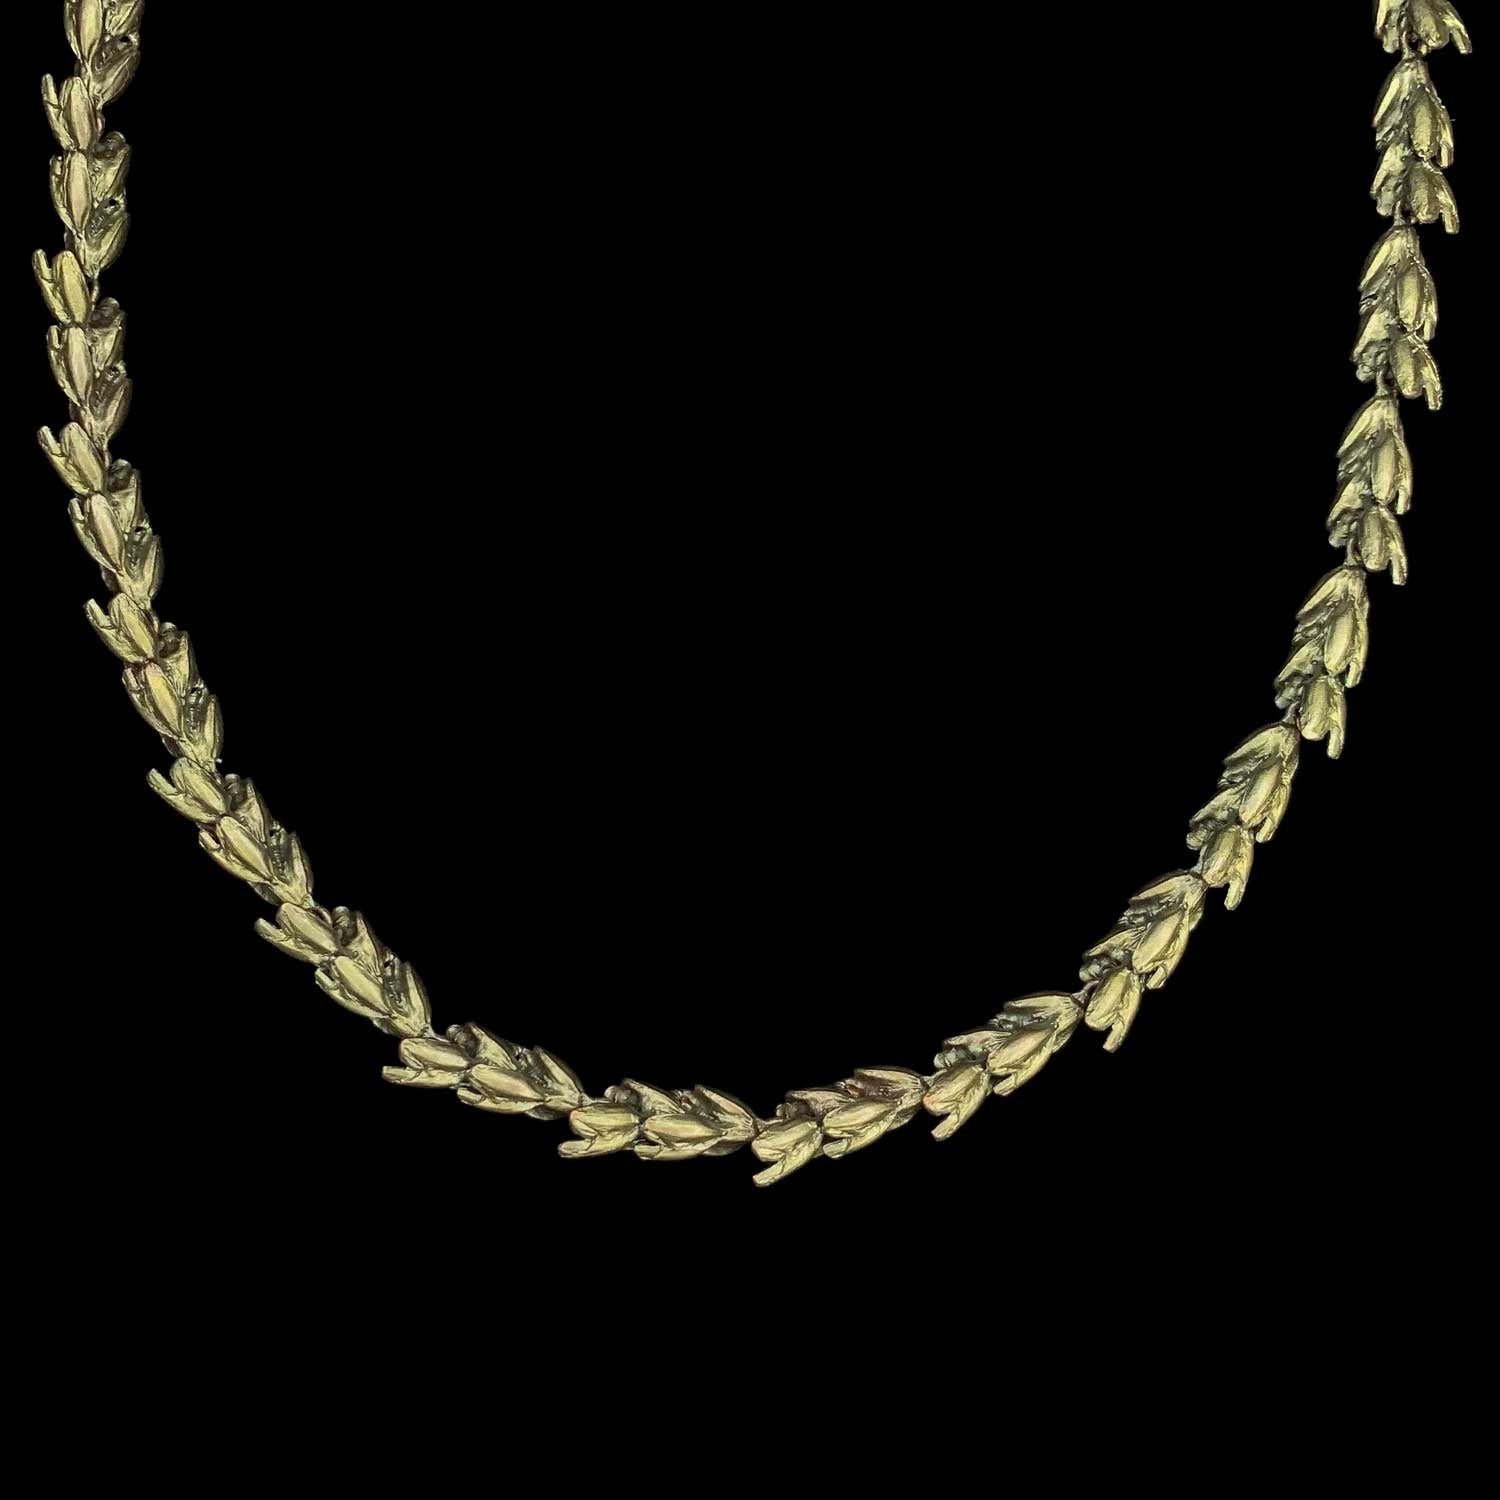 Wheat Necklace - Statement